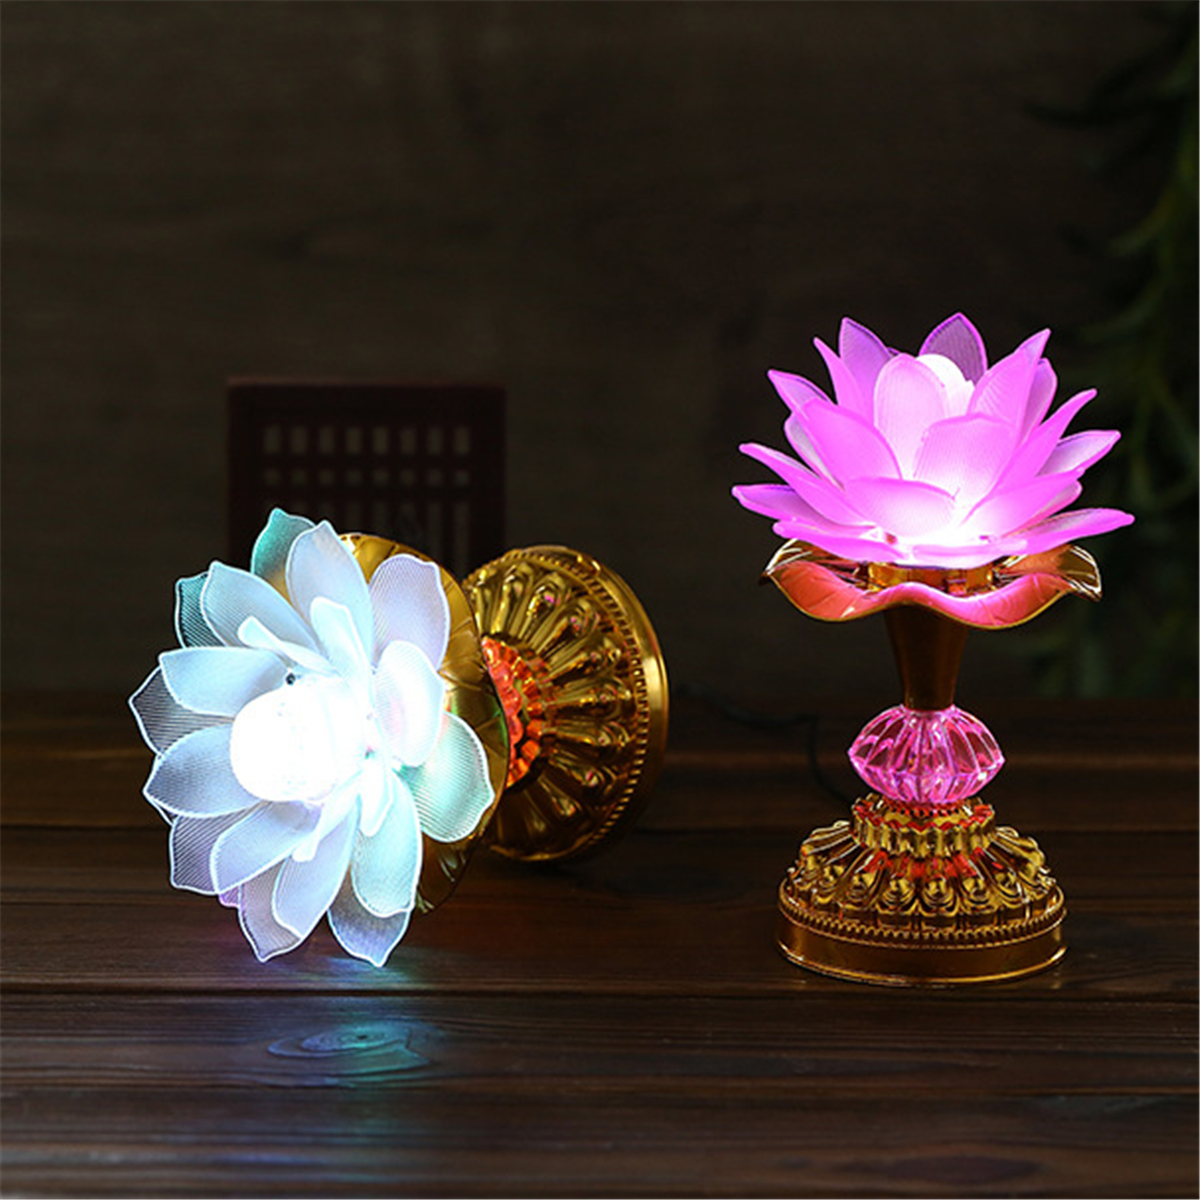 53-Buddhism-Song-7-Color-Changing-Lotus-LED-Night-Light-Music-Holiday-Lamp-Decoration-1683172-9